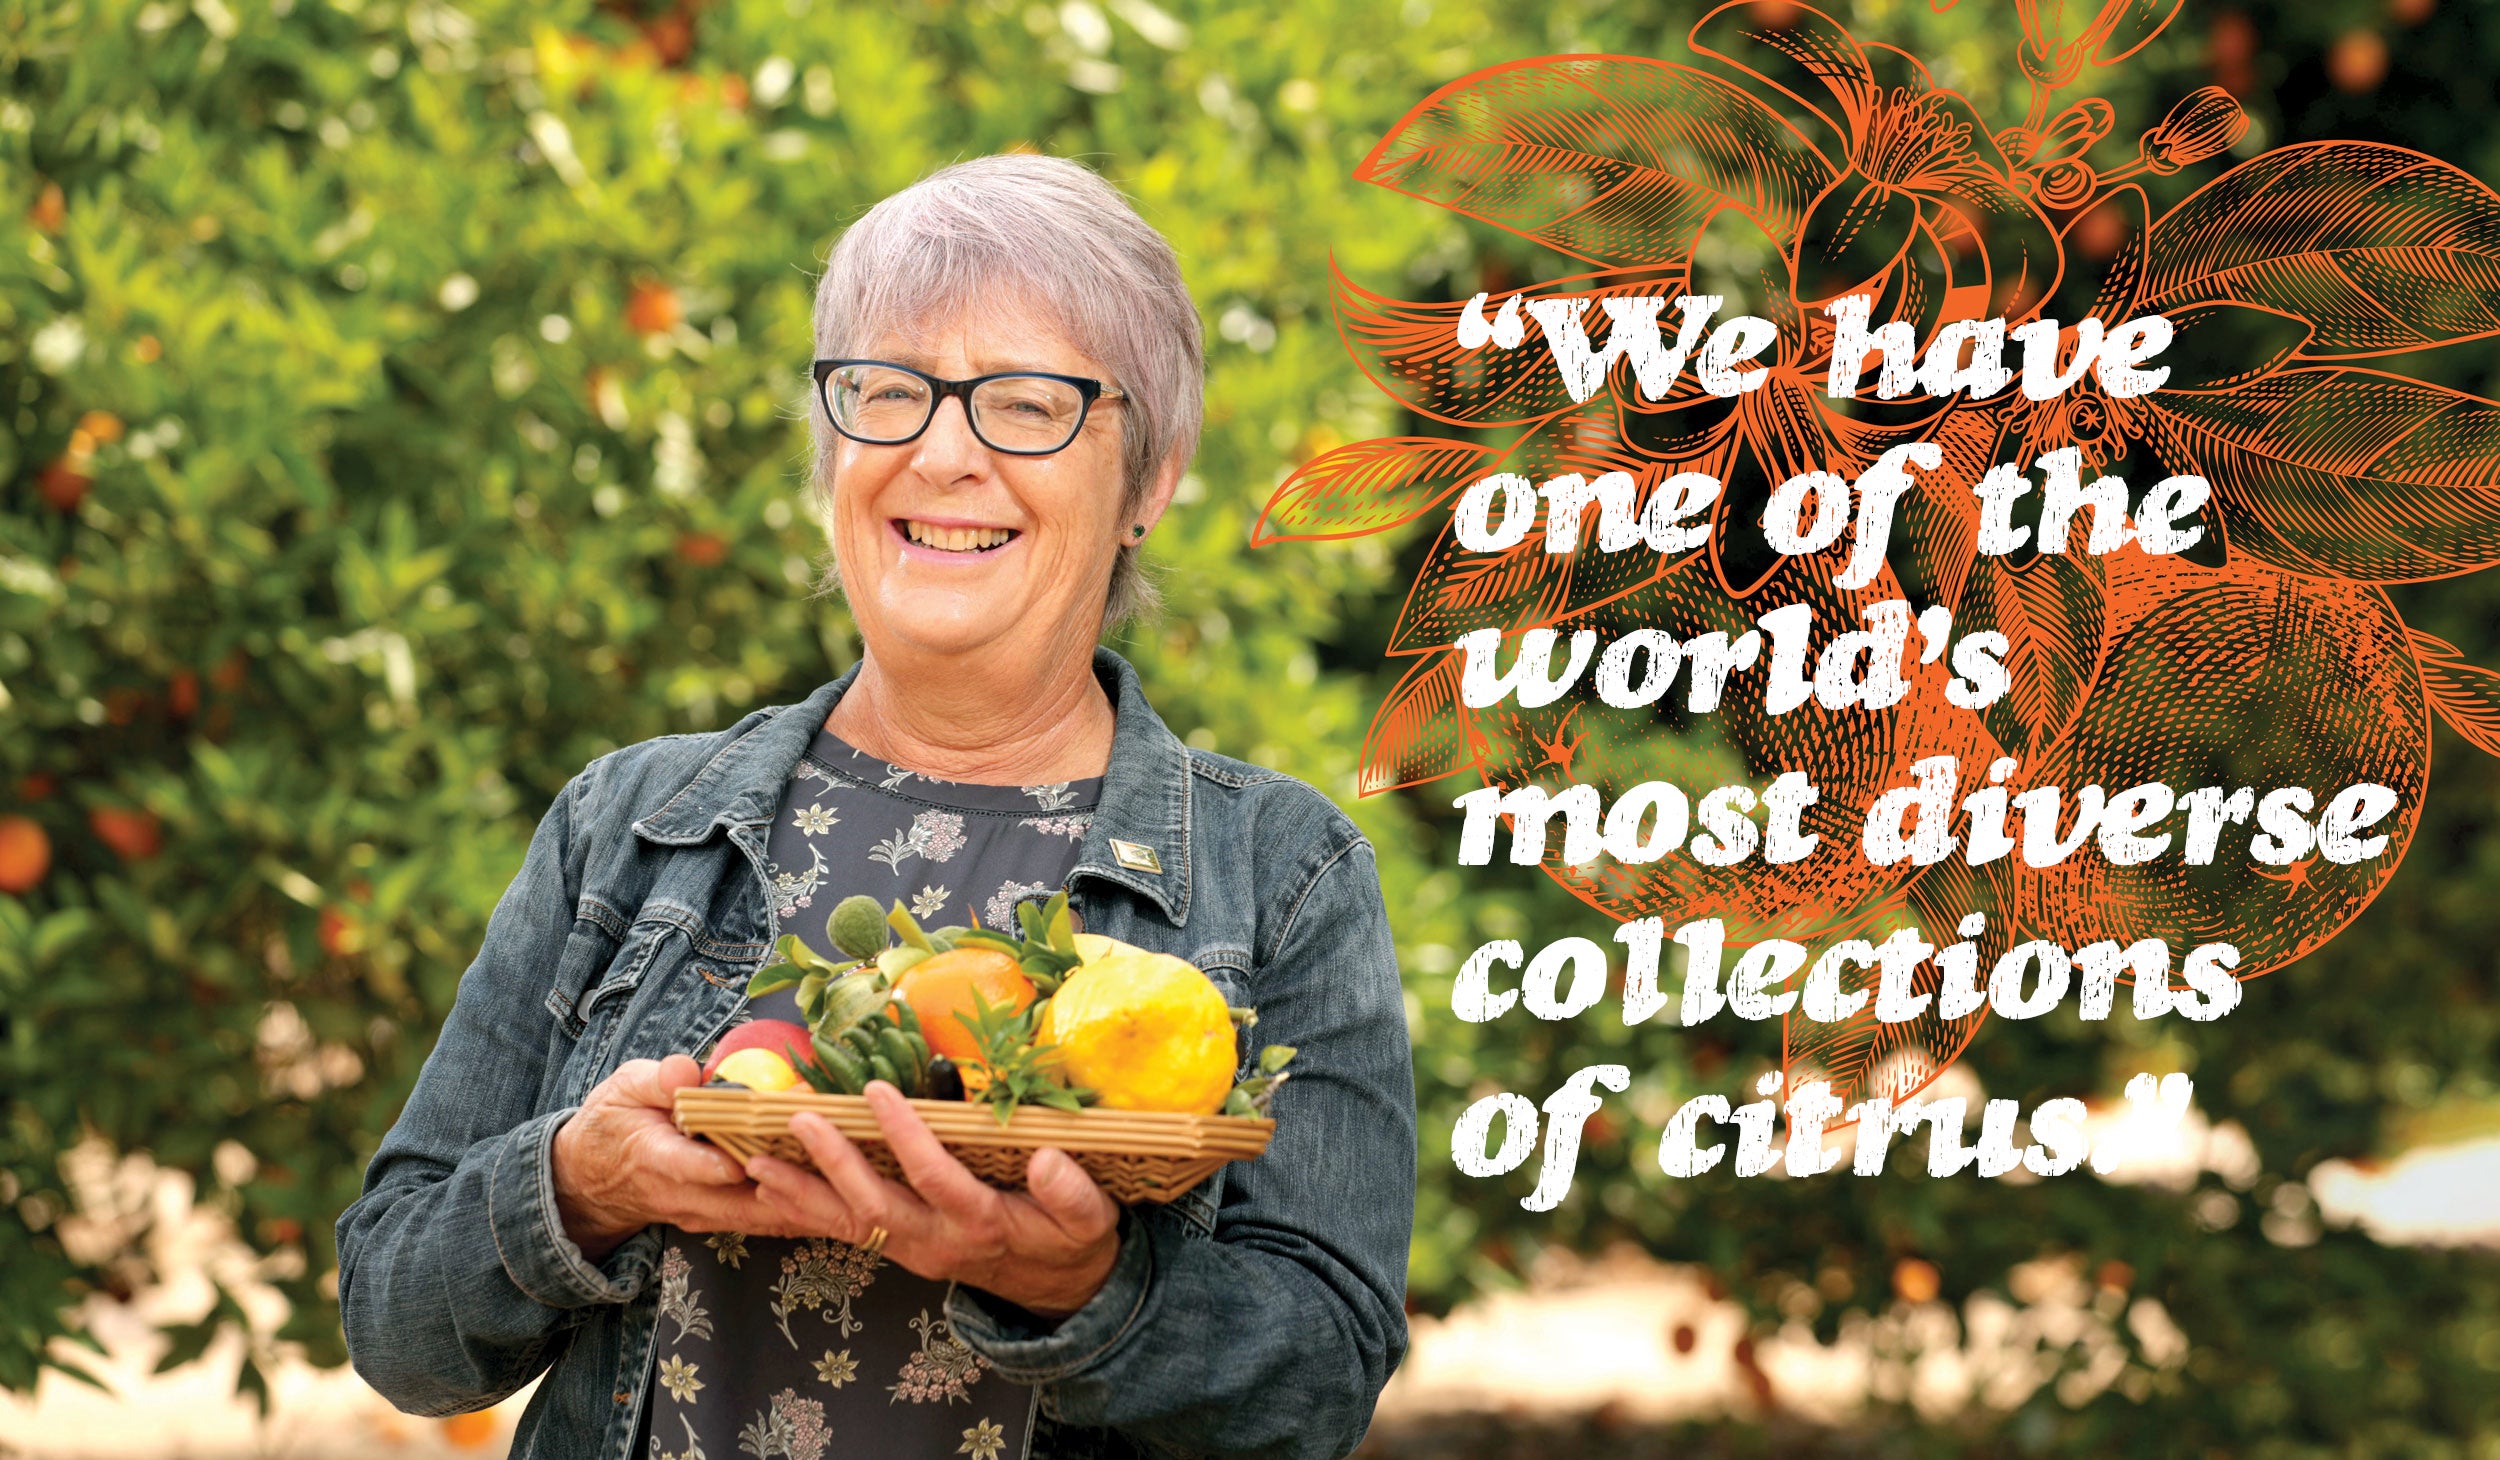 "We have one of the world's most diverse collections of citrus" - tracy khan